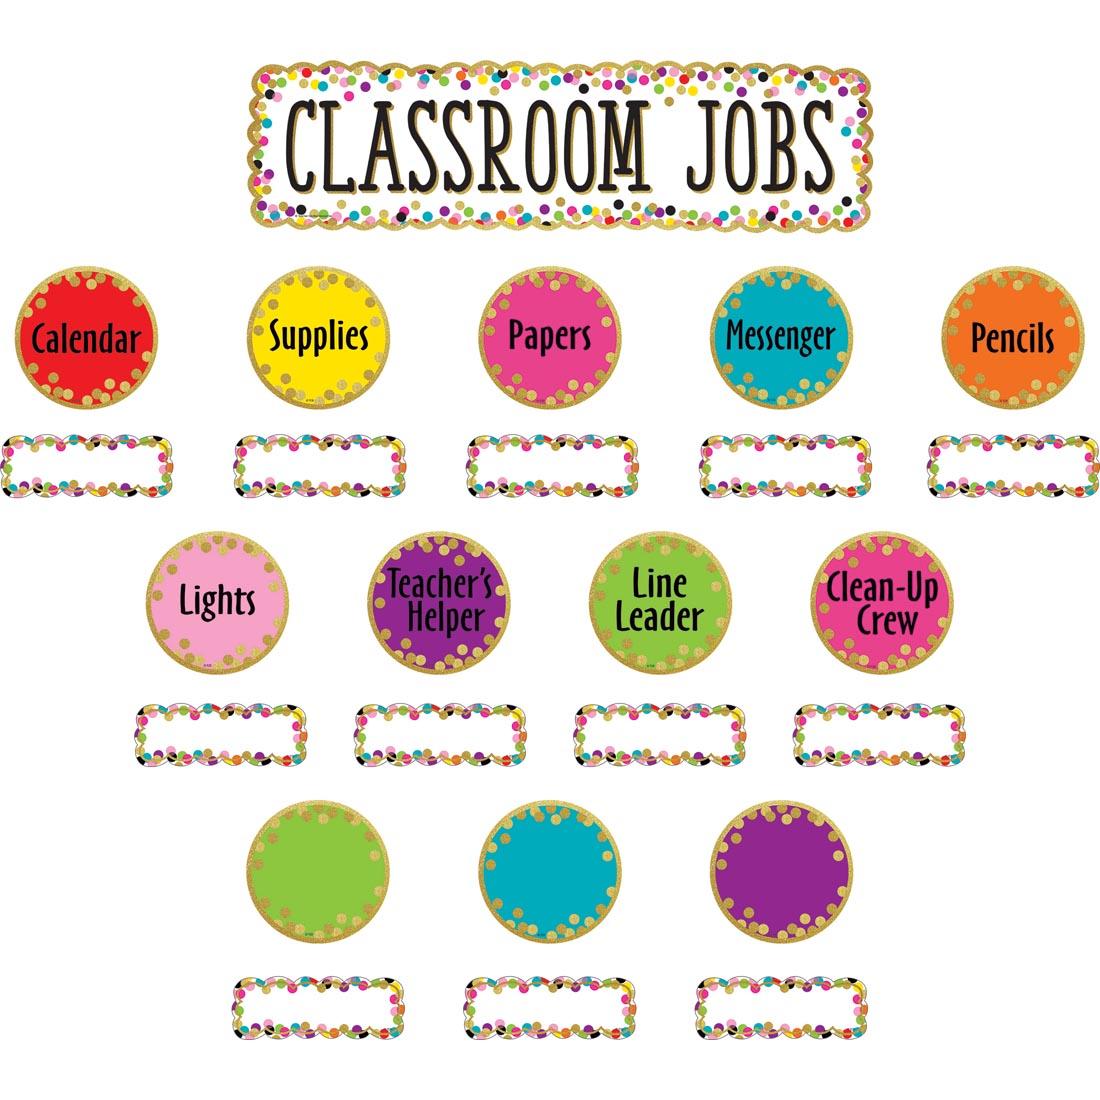 Classroom Jobs Mini Bulletin Board Set from the Confetti collection by Teacher Created Resources